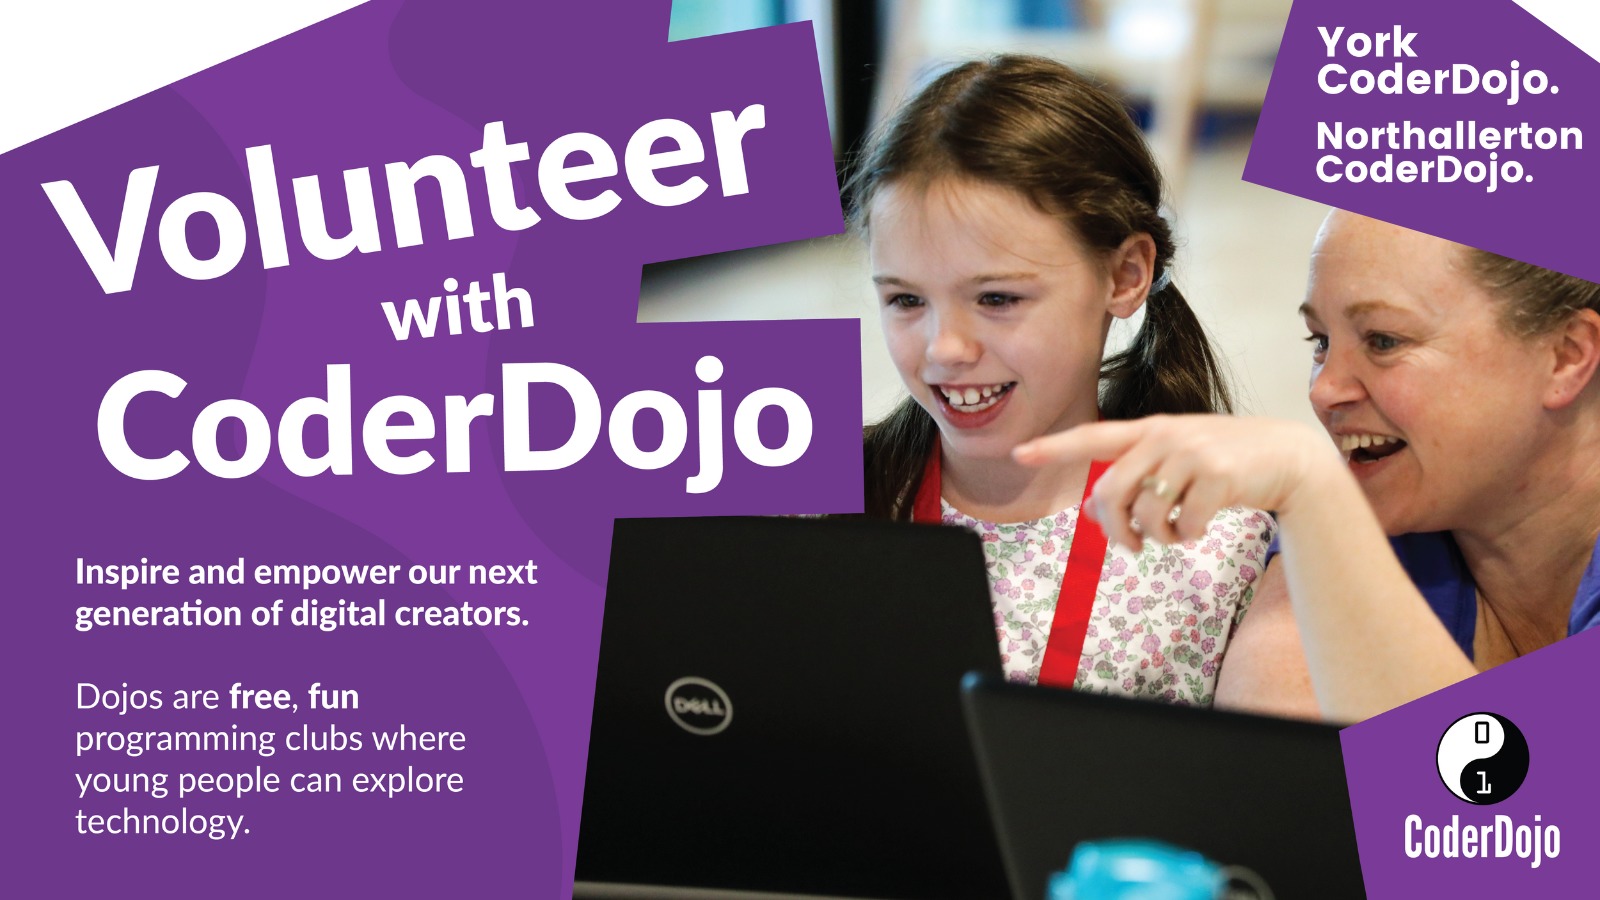 A poster about Volunteering with York CoderDojo